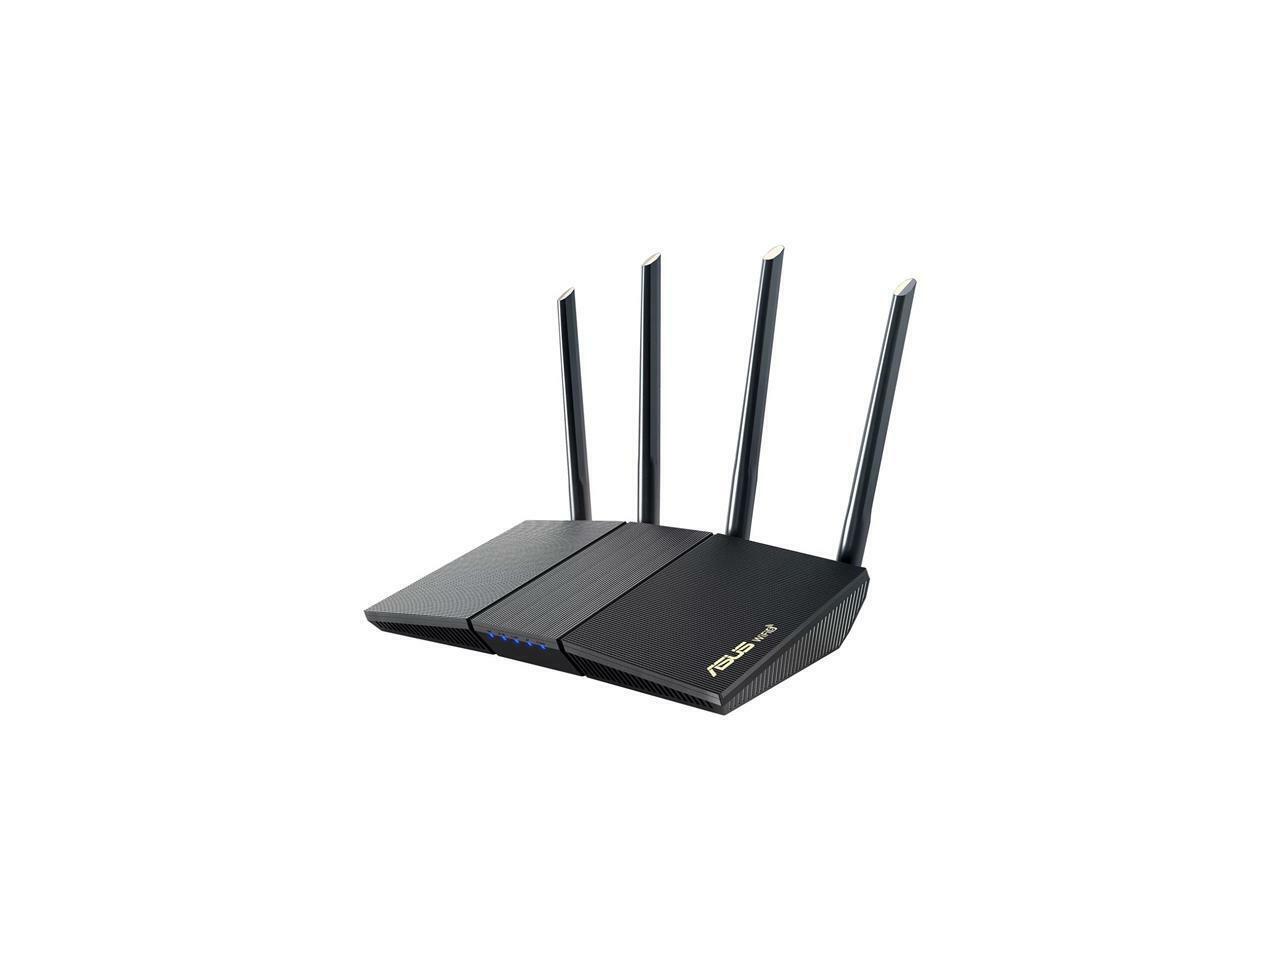 ASUS AX1800 Dual Band WiFi 6 (802.11ax) Router Supporting MU-MIMO and OFDMA Tech